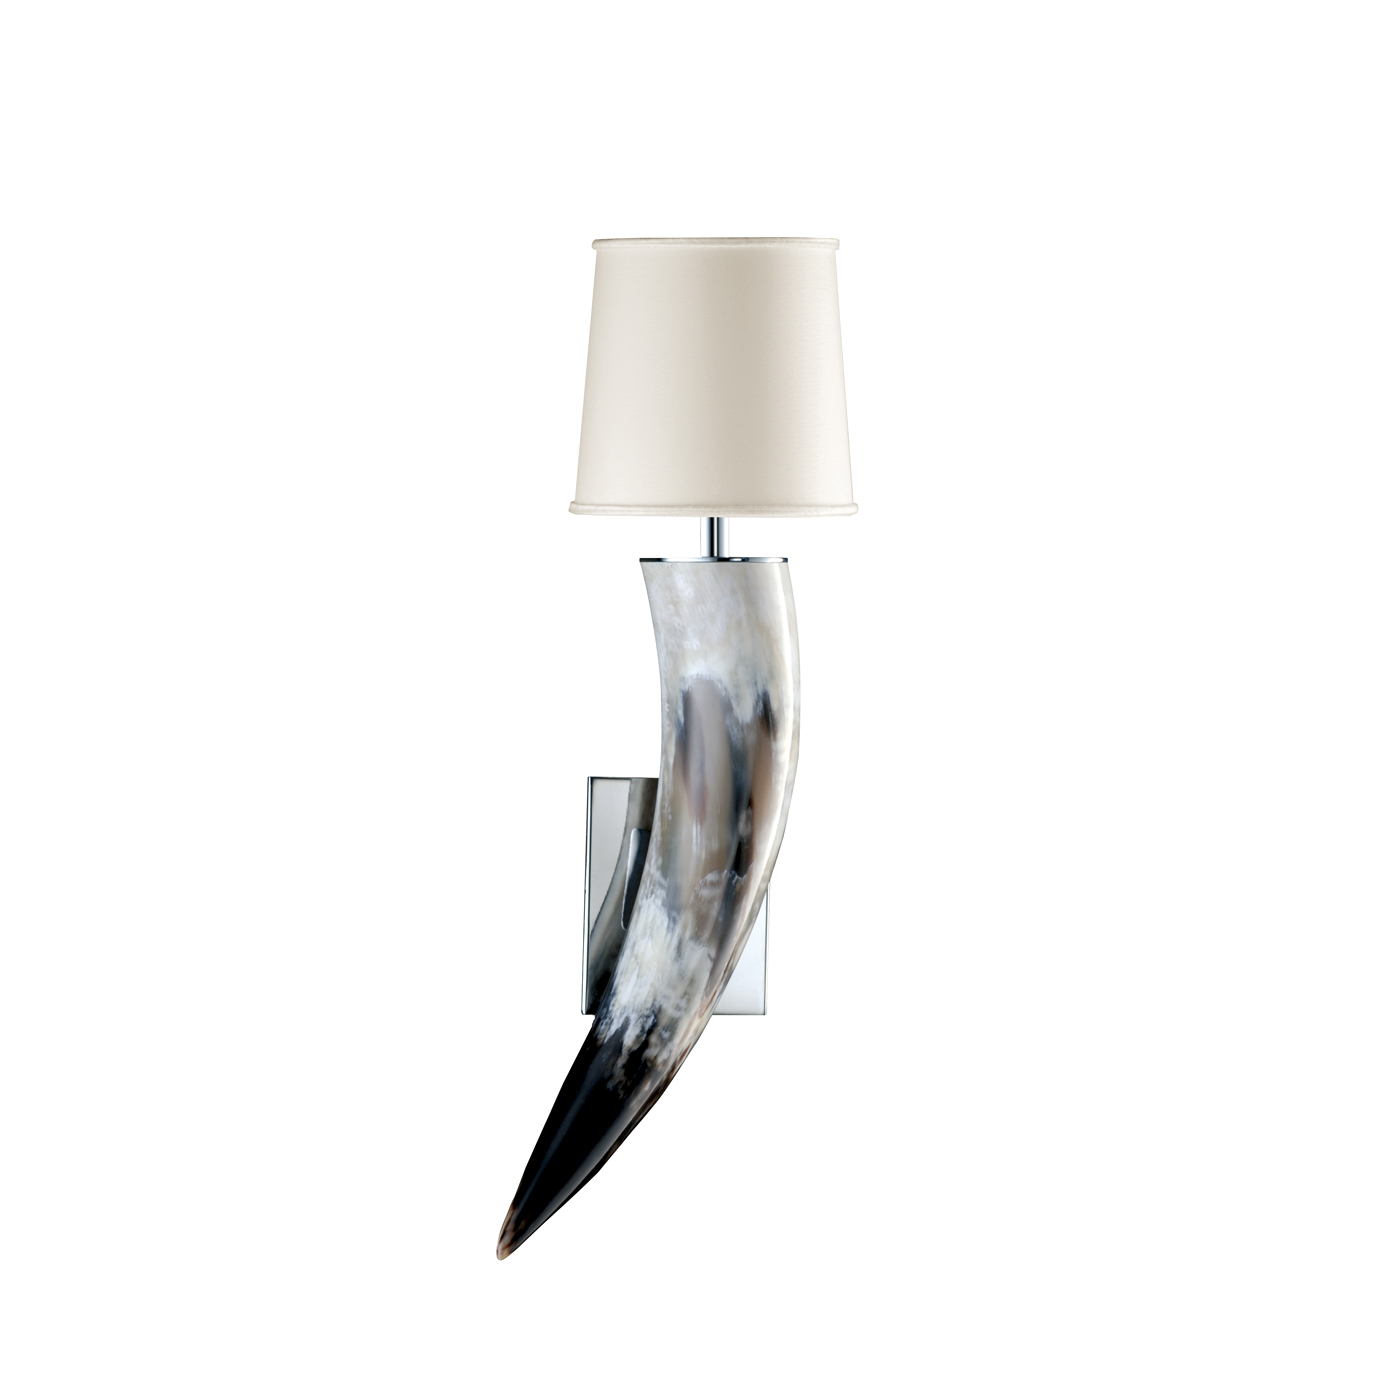 Lamps - Gilda wall sconce in horn and chromed brass - Arcahorn